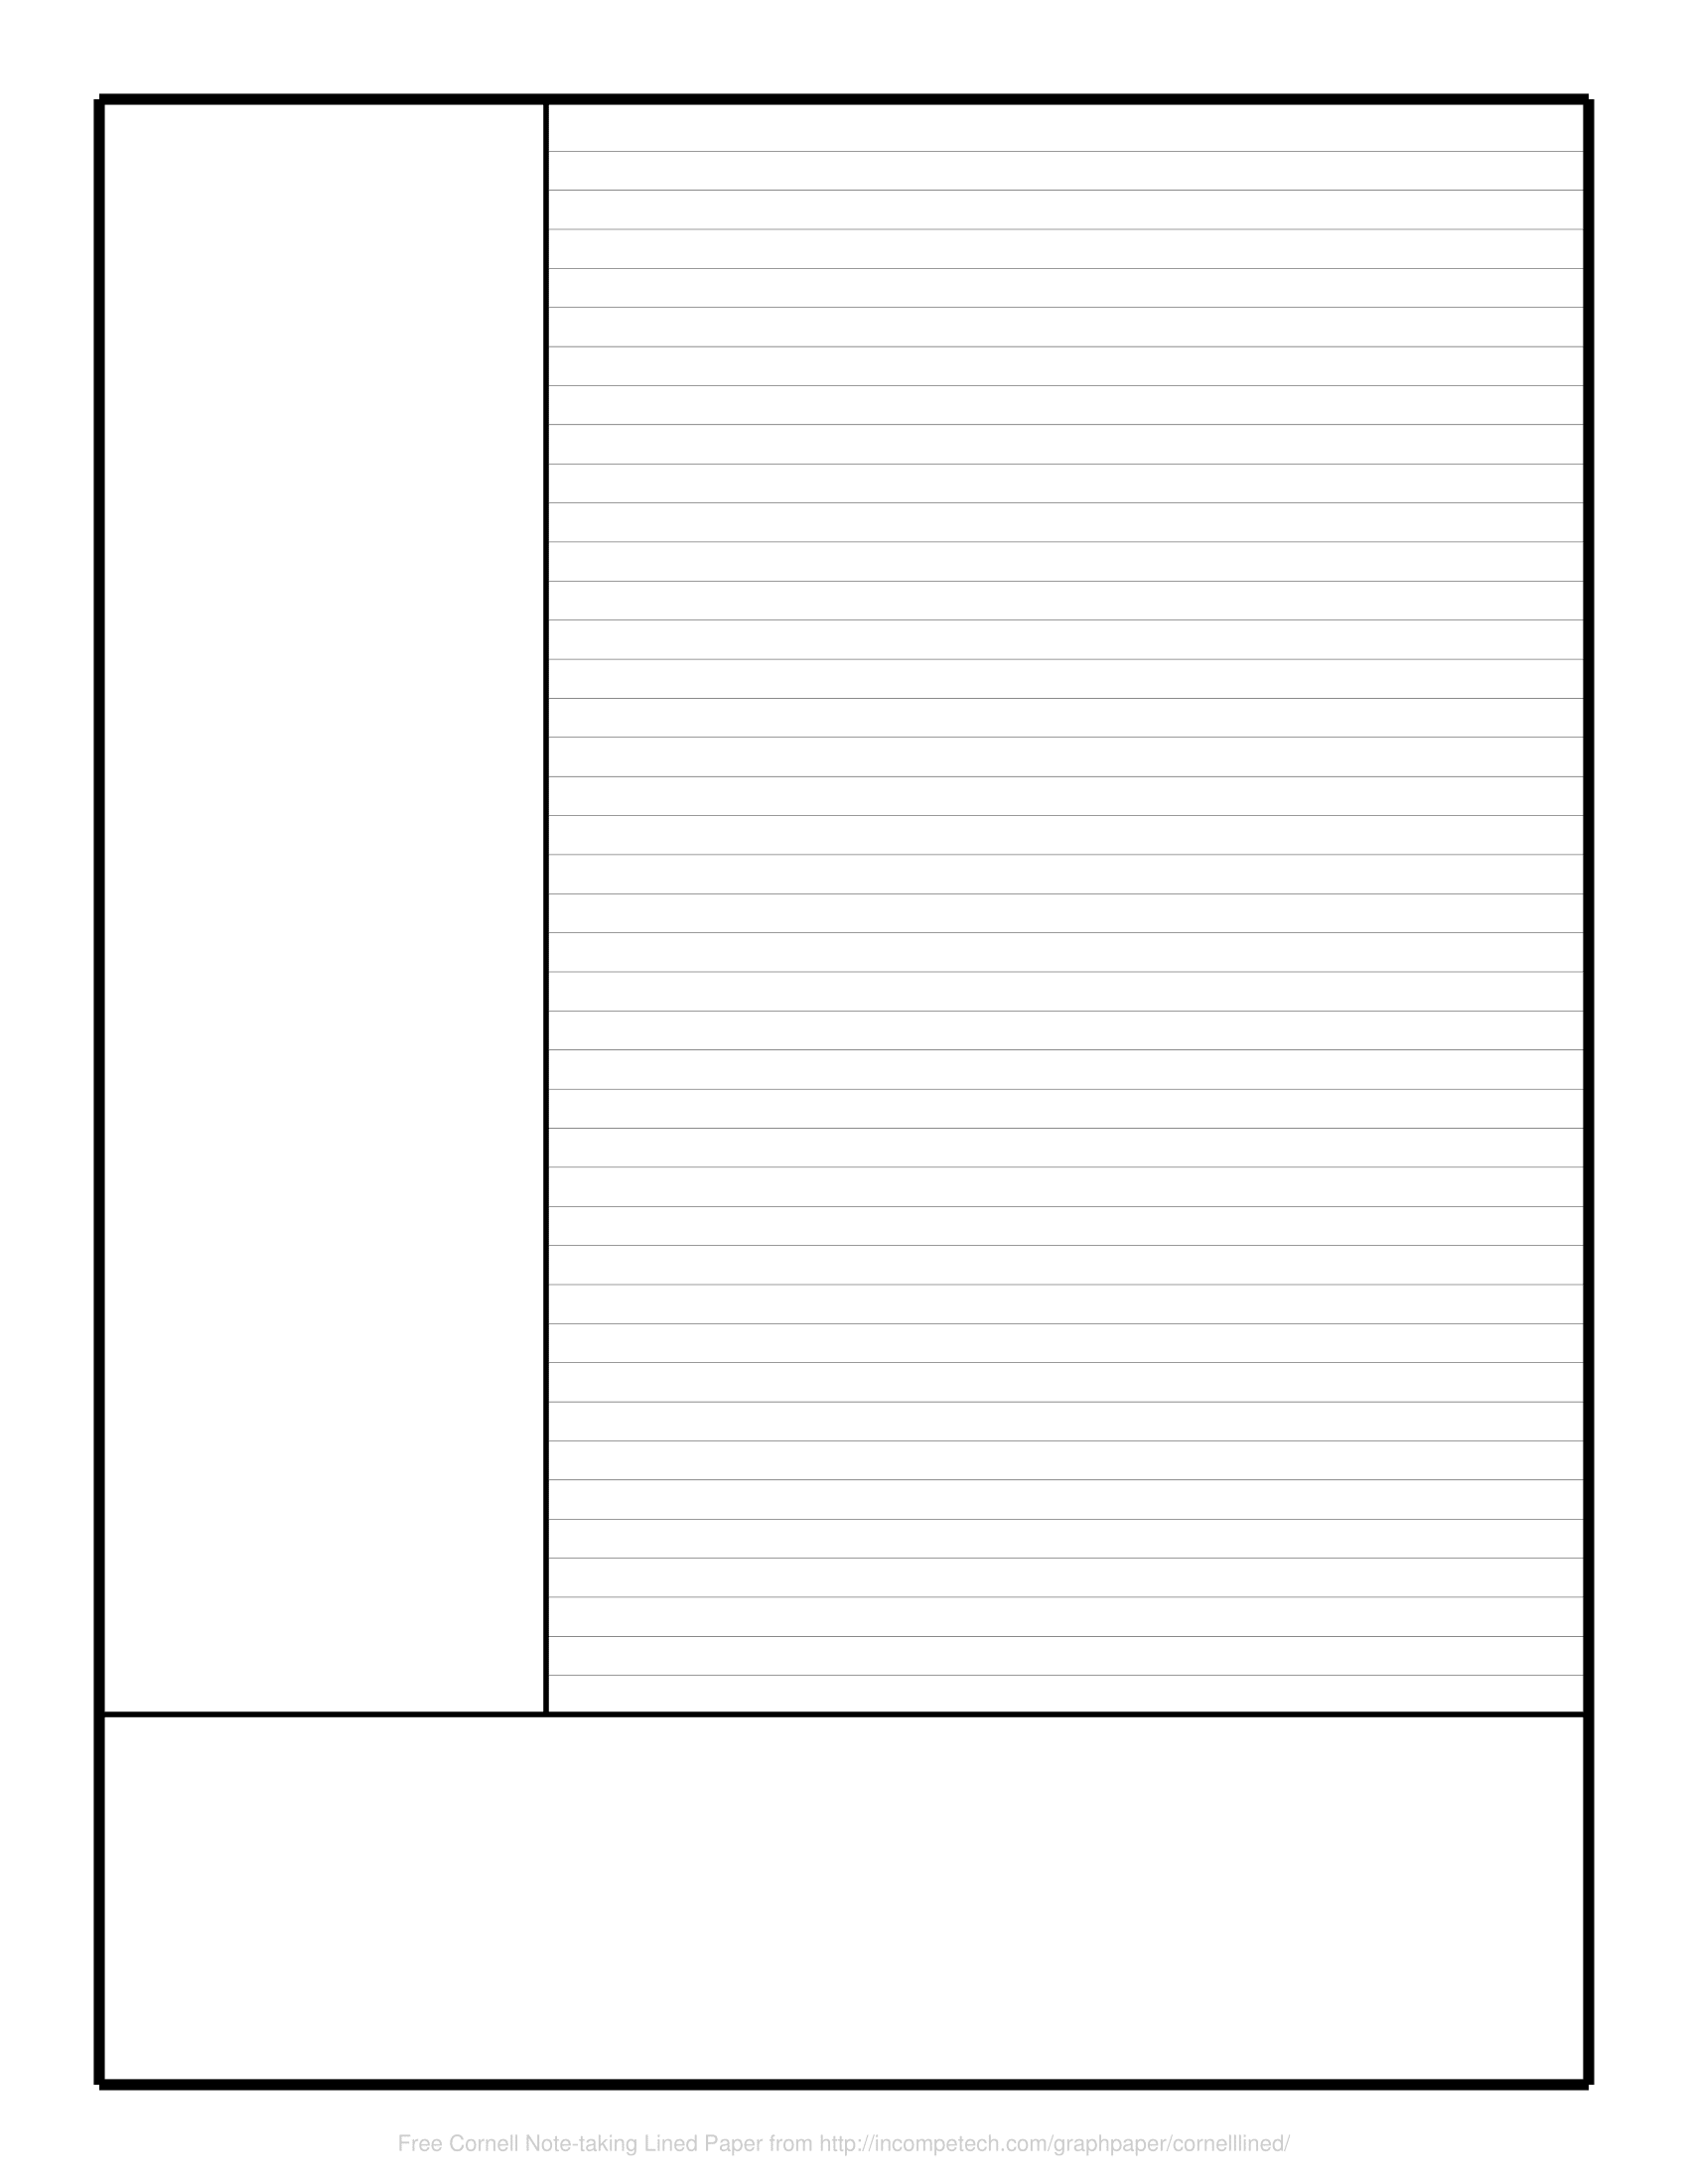 Free Online Graph Paper / Cornell Note-taking Lined Inside Best Note Taking Template